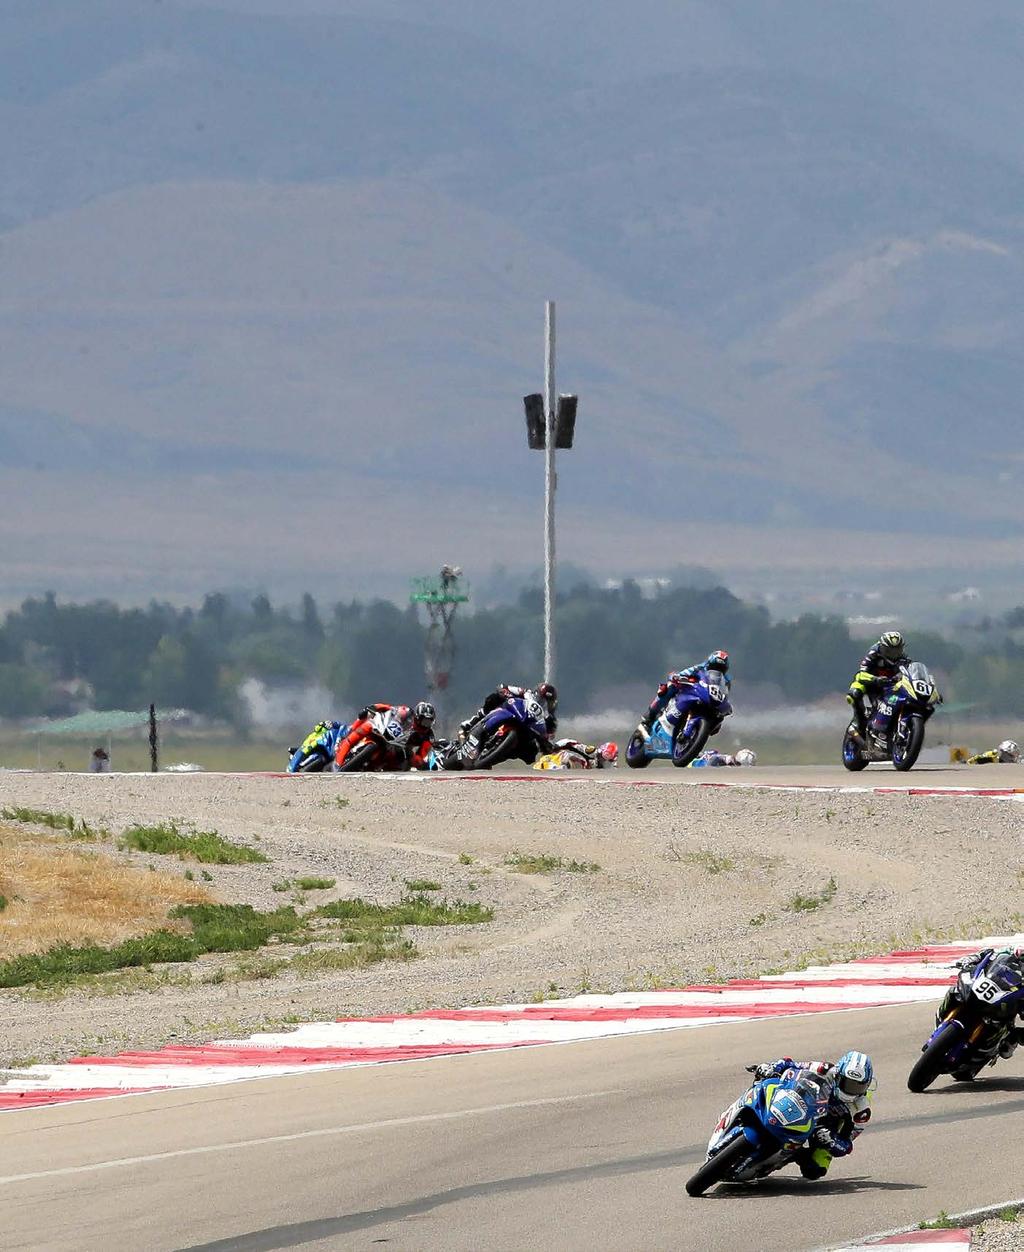 ROUND 6 / JULY 20-22, 2018 UTAH MOTORSPORTS CAMPUS / TOOLE, UTAH ROAD RACE P84 MOTOAMERICA FIM NORTH AMERICAN ROAD RACING CHAMPI In the championship race, Beaubier leads on 248 to Elias 199; Scholtz